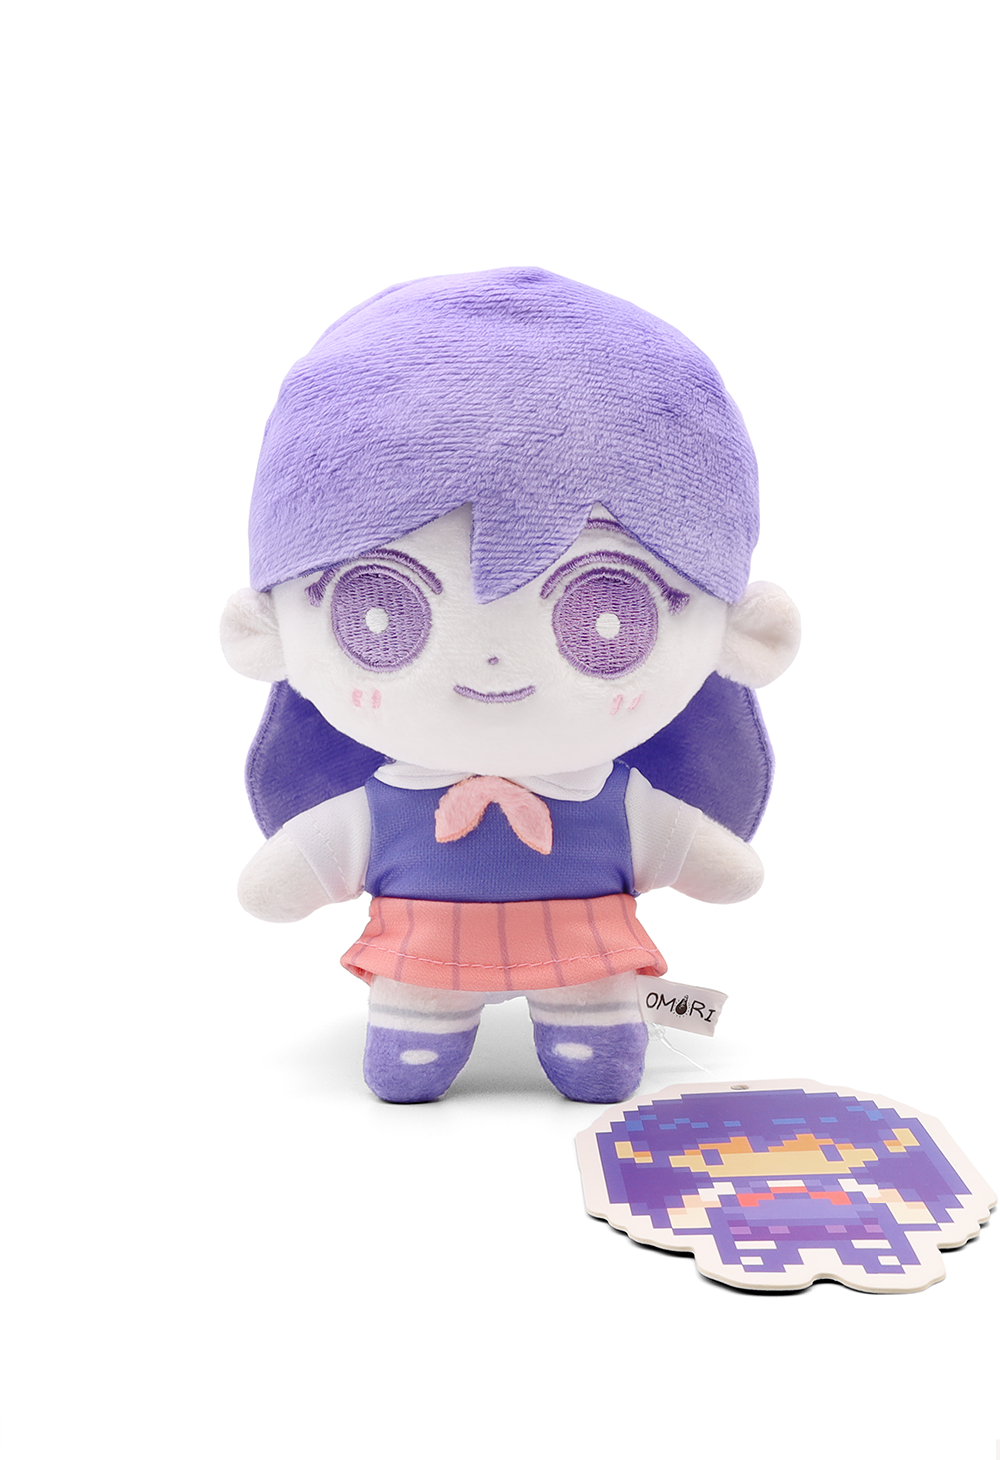 NEW Official Omocat OMORI Plush MARI 7 Tall New In Factory Package